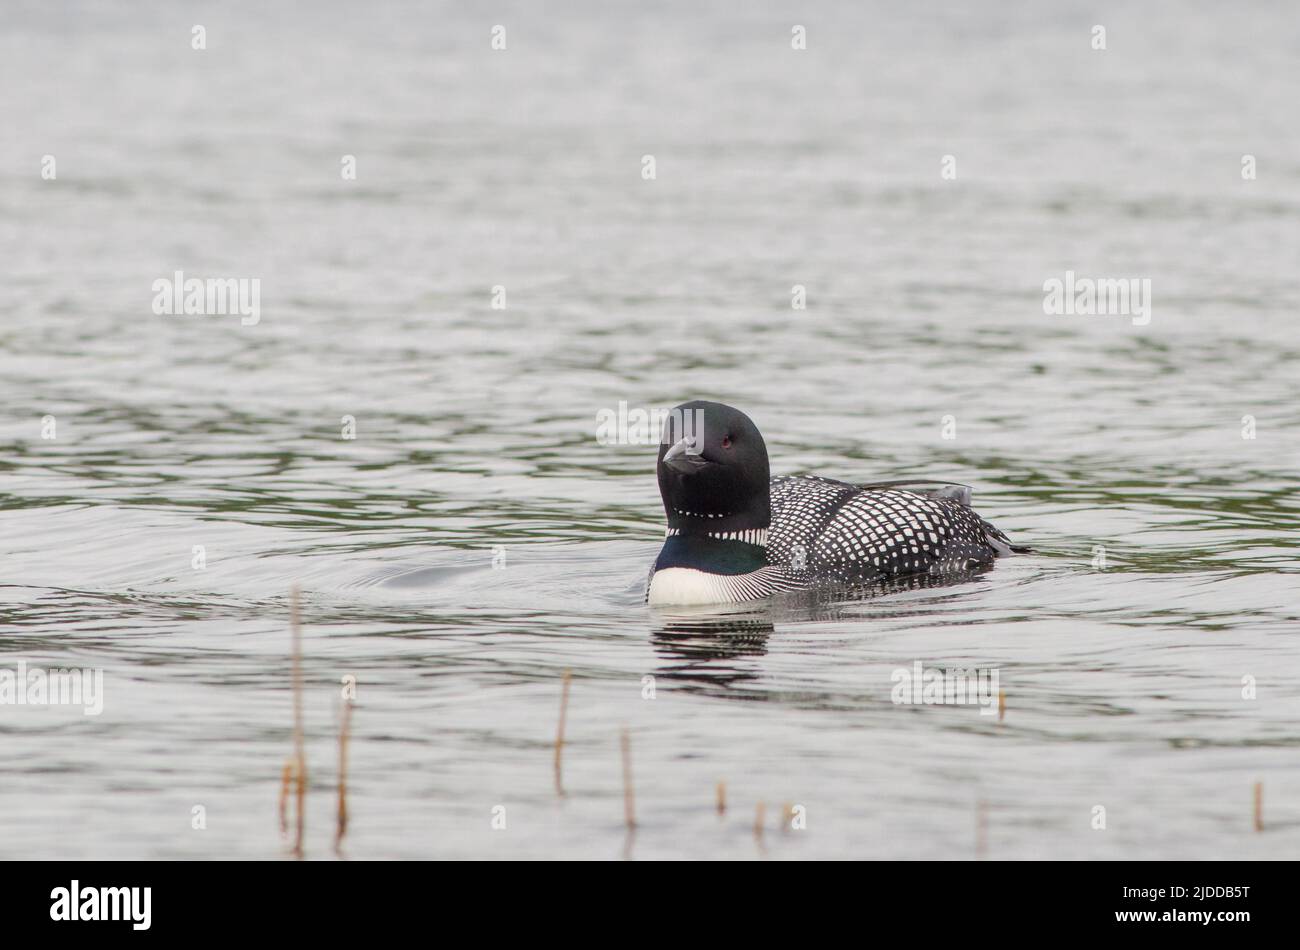 A common loon floating towards the camera on Echo Lake in Acadia National Park, Maine, USA Stock Photo